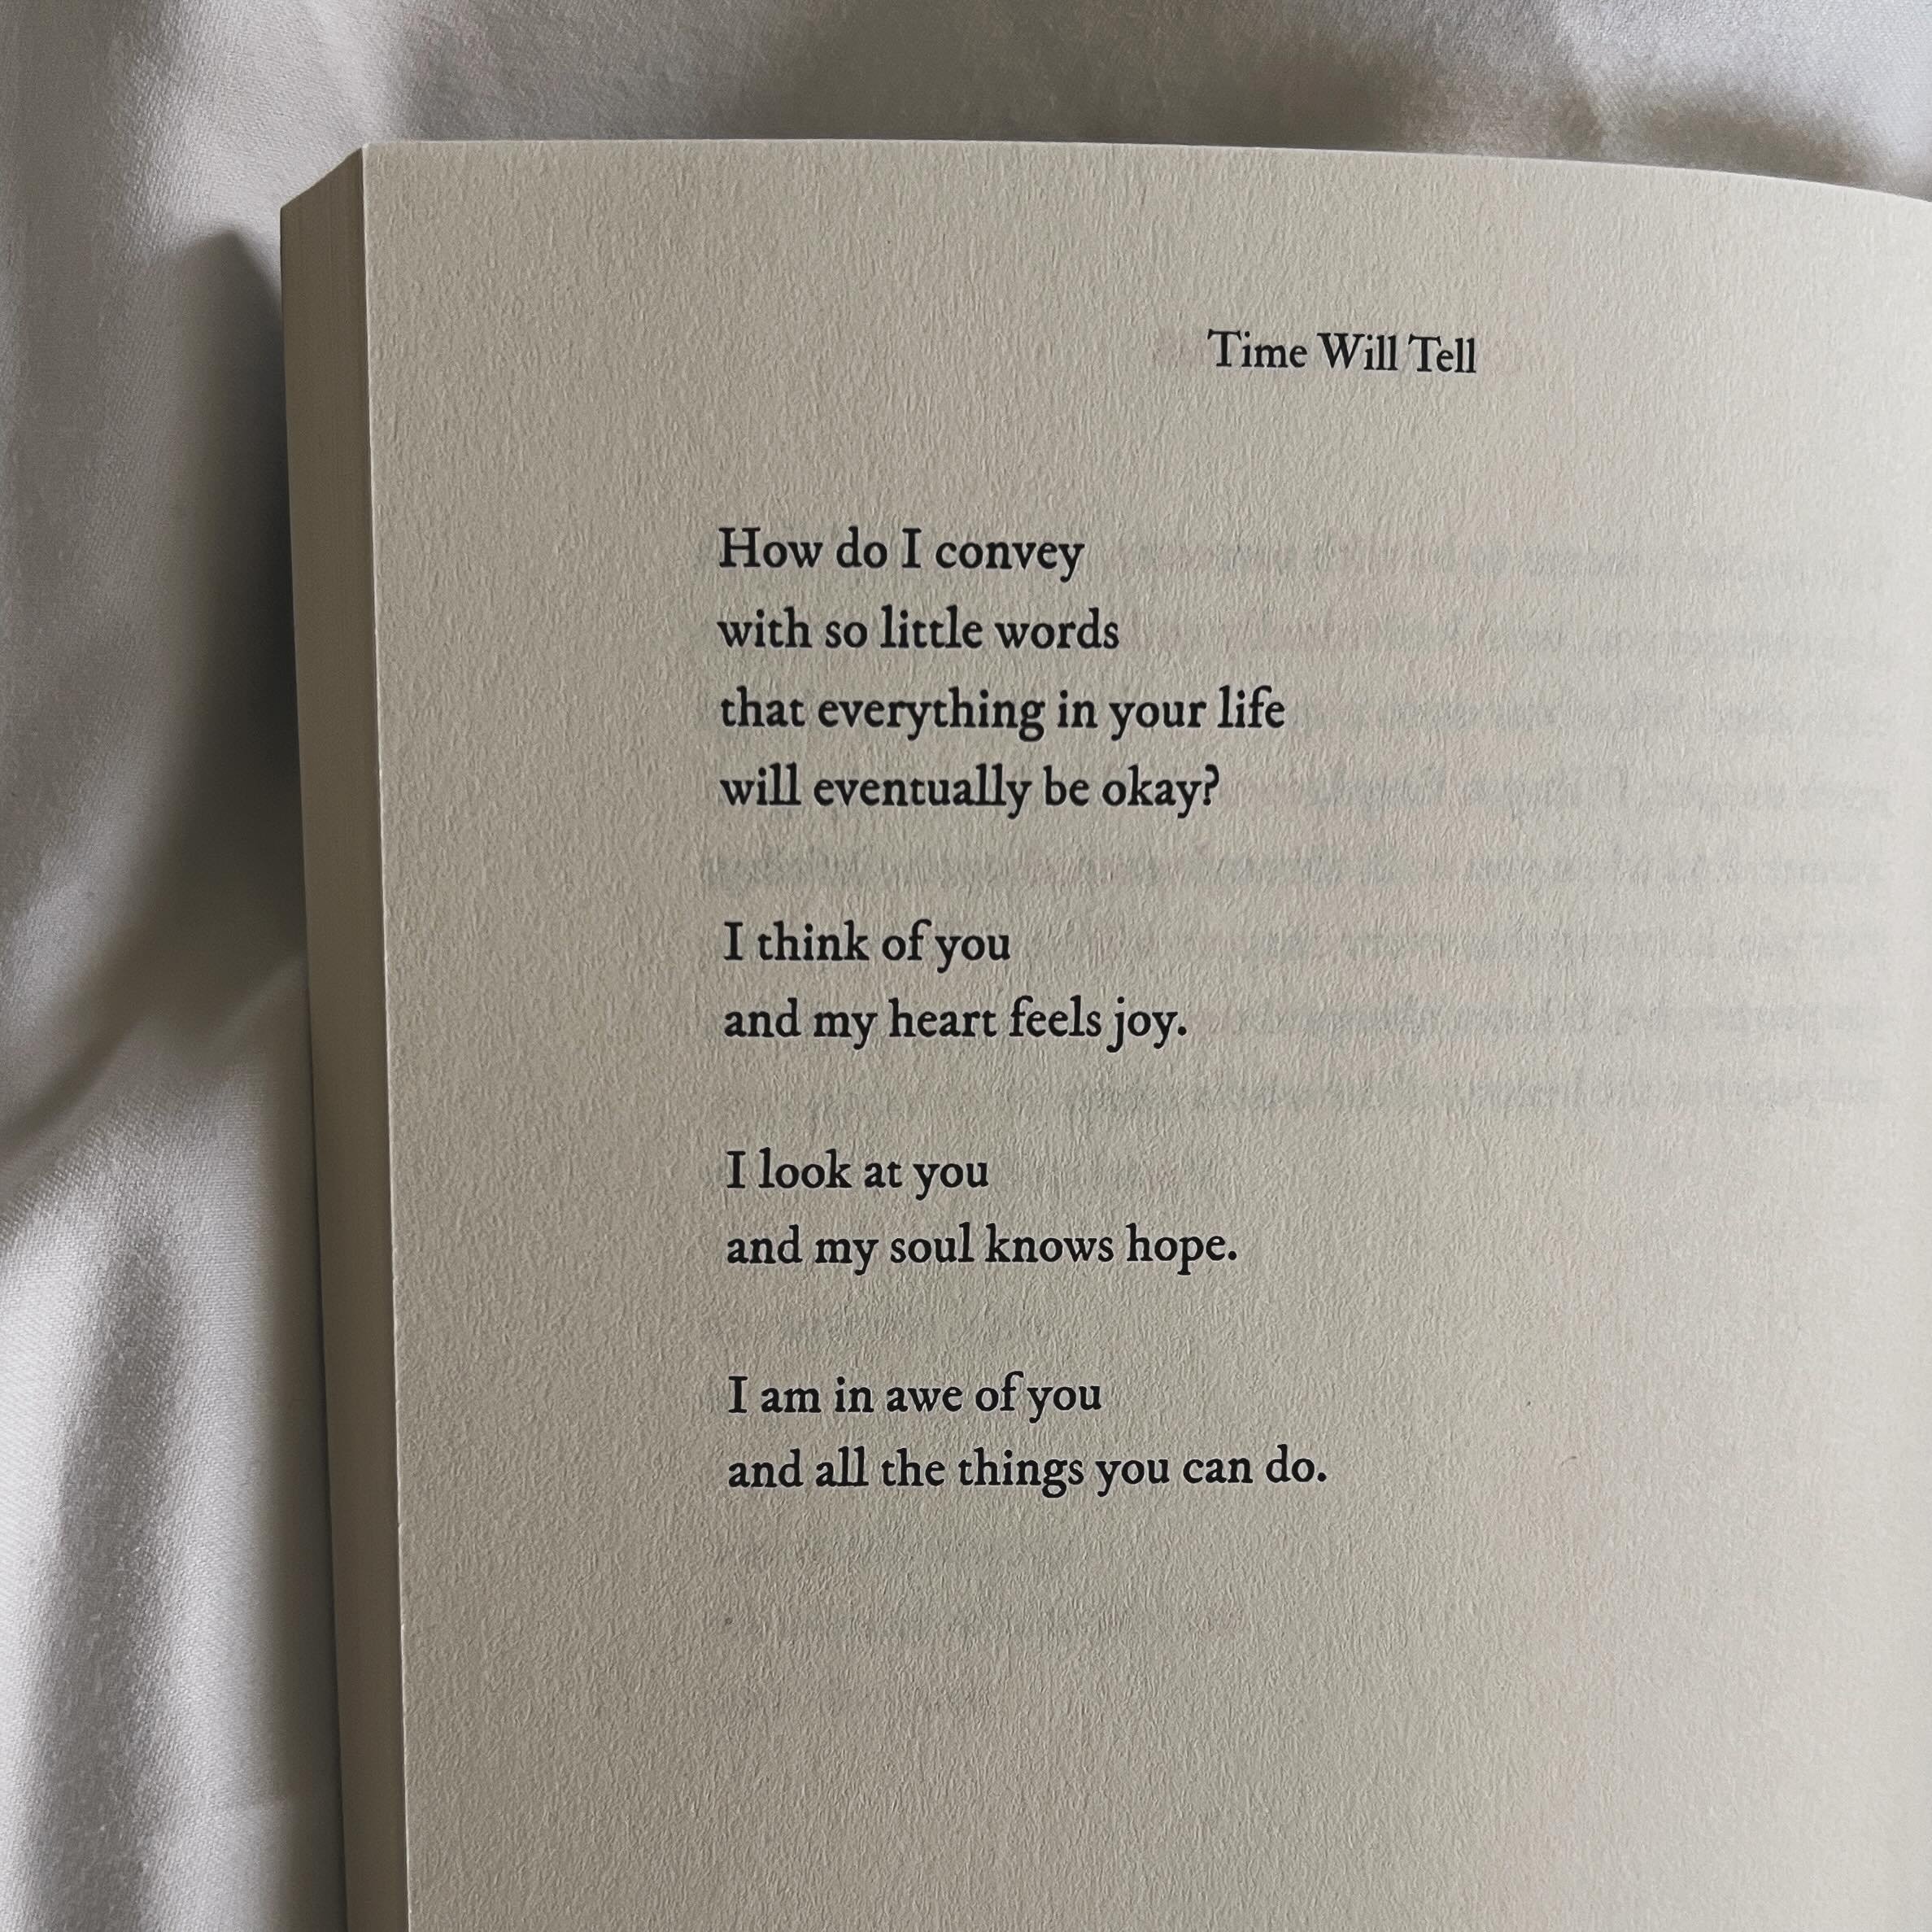 📖: Time Will Tell by Courtney Peppernell
.
.
.
.
#pillowthoughts #courtneypeppernell #healing #love #poetrycommunity #bookish #booklover #poemsofinstagram